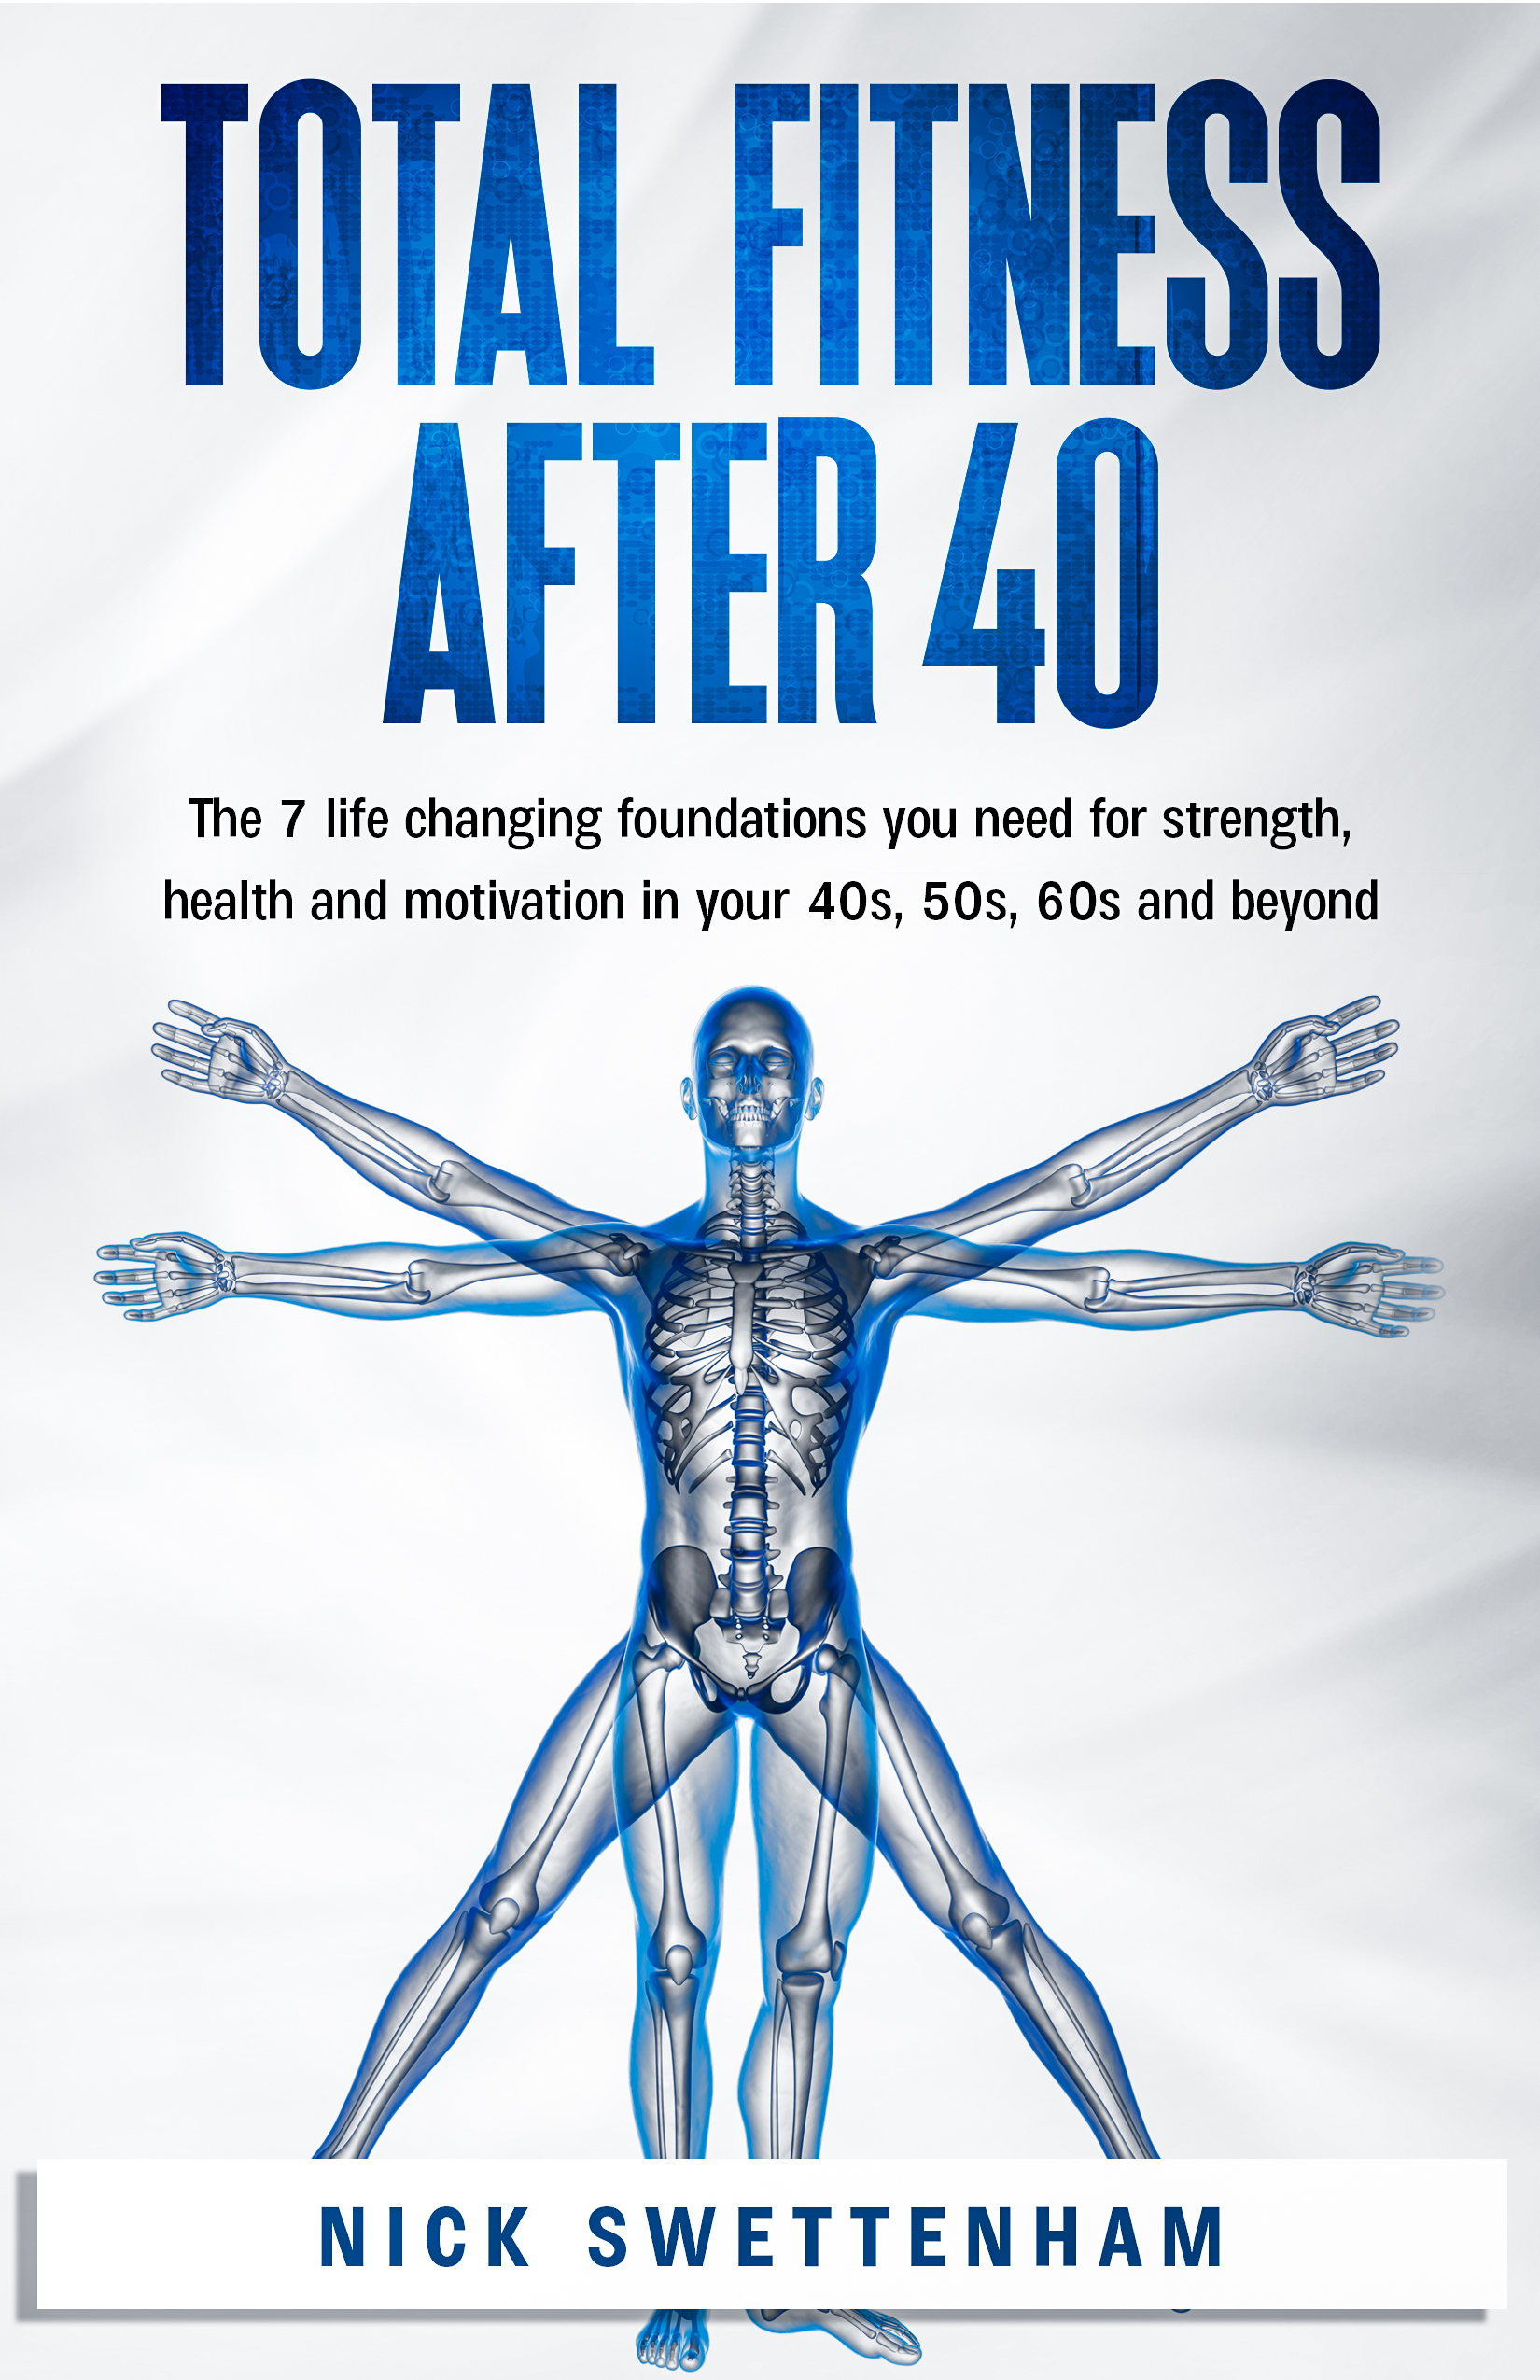 Reviewing Total Fitness After 40: The 7 Life-Changing Foundations You Need for Strength, Health and Motivation in your 40s, 50s, 60s, and Beyond by Nick Swettenham